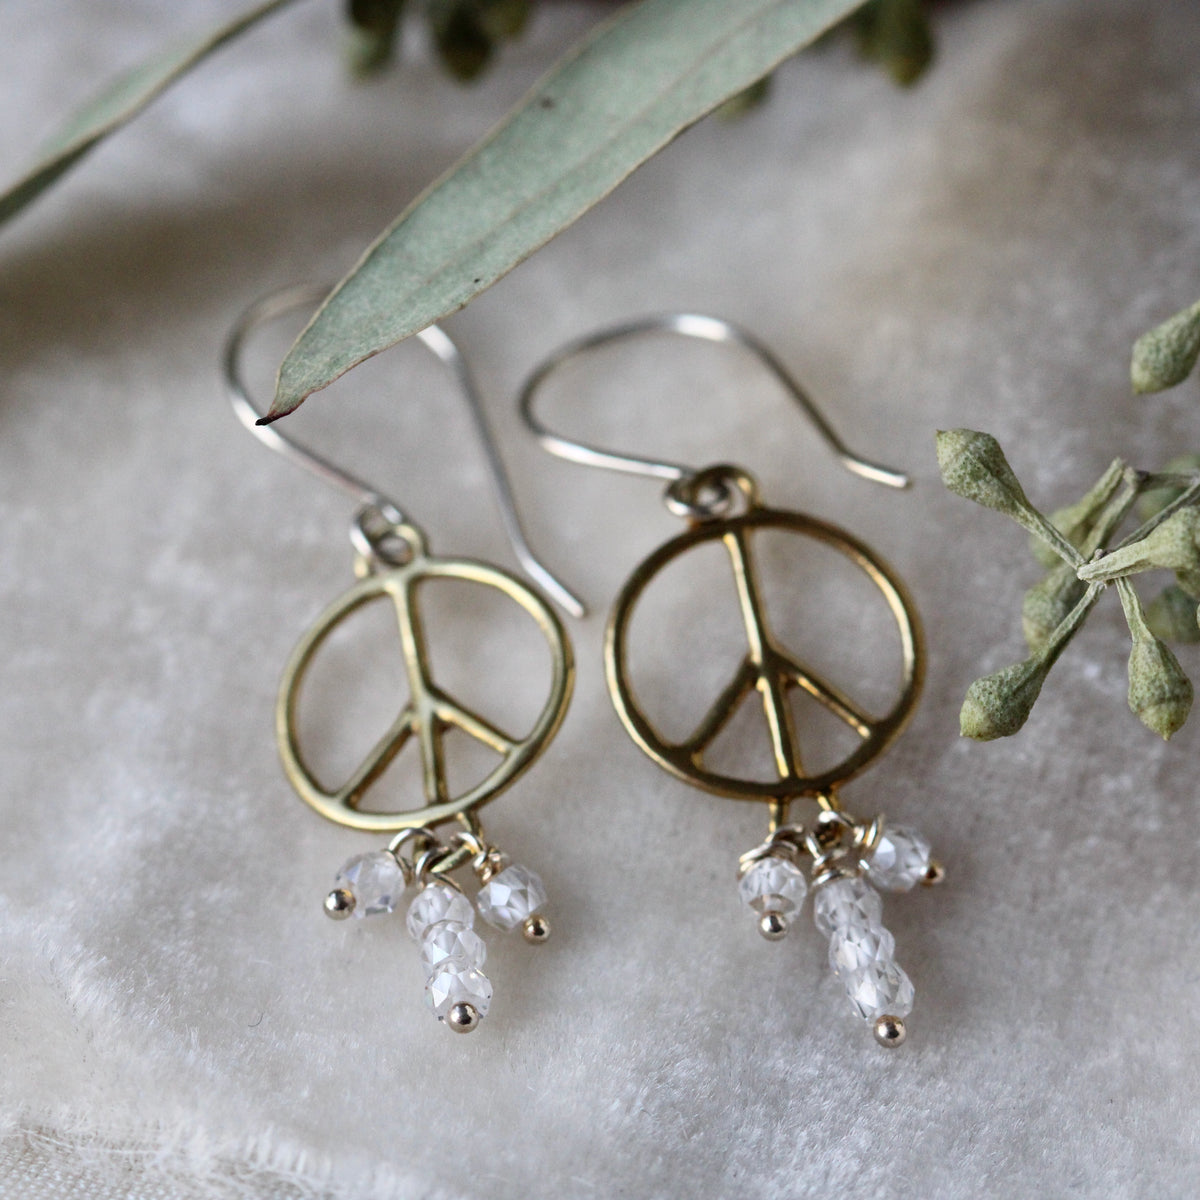 Bronze Peace symbol dangle earrings sterling and Clear CZs